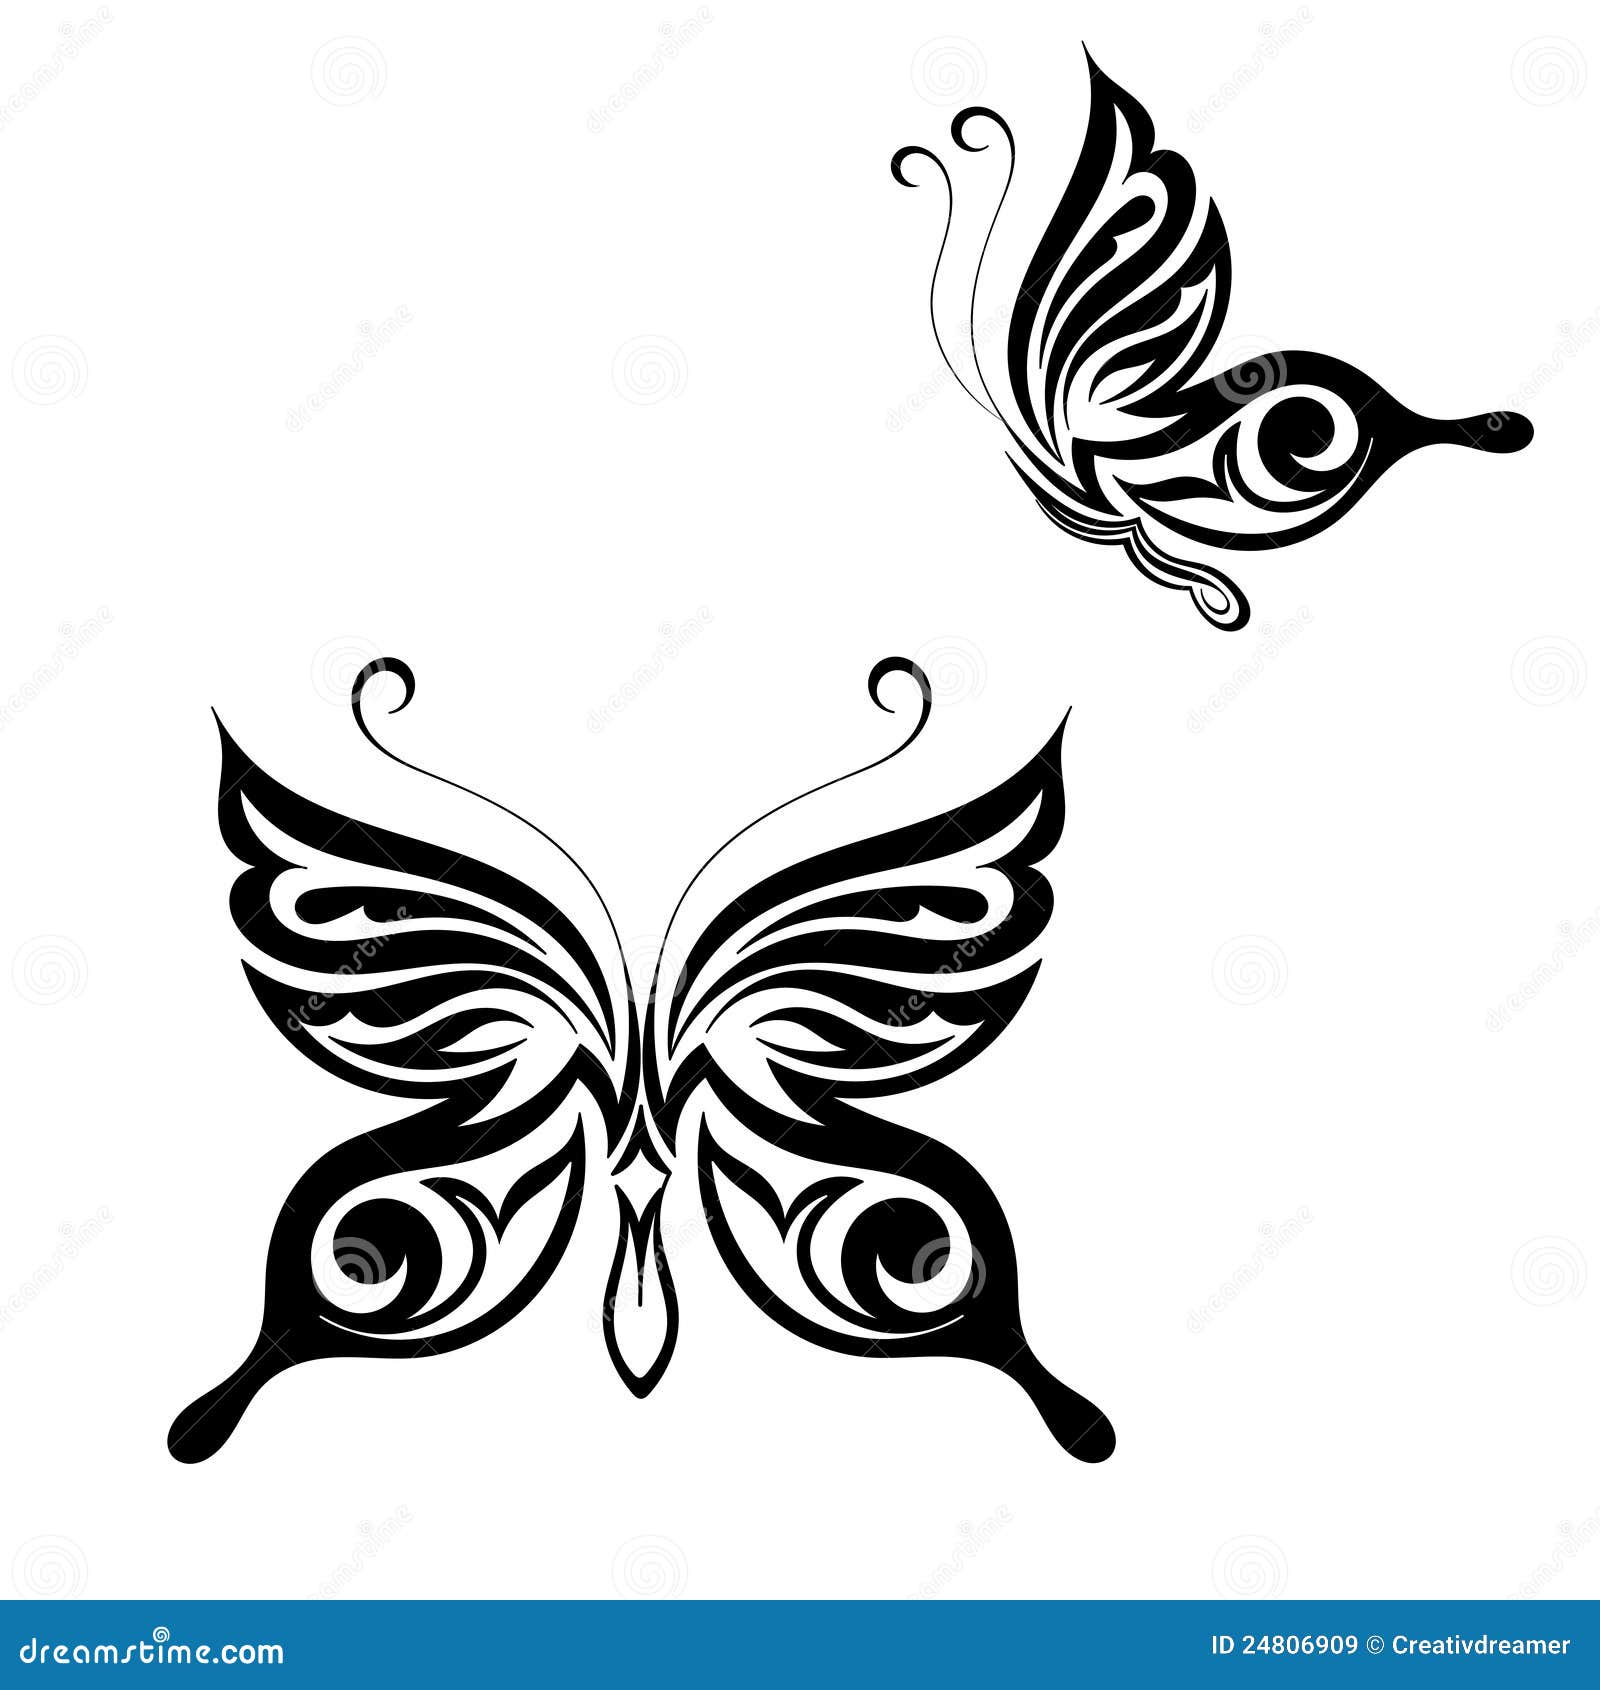 Butterfly tattoo style stock vector. Illustration of artistic ...